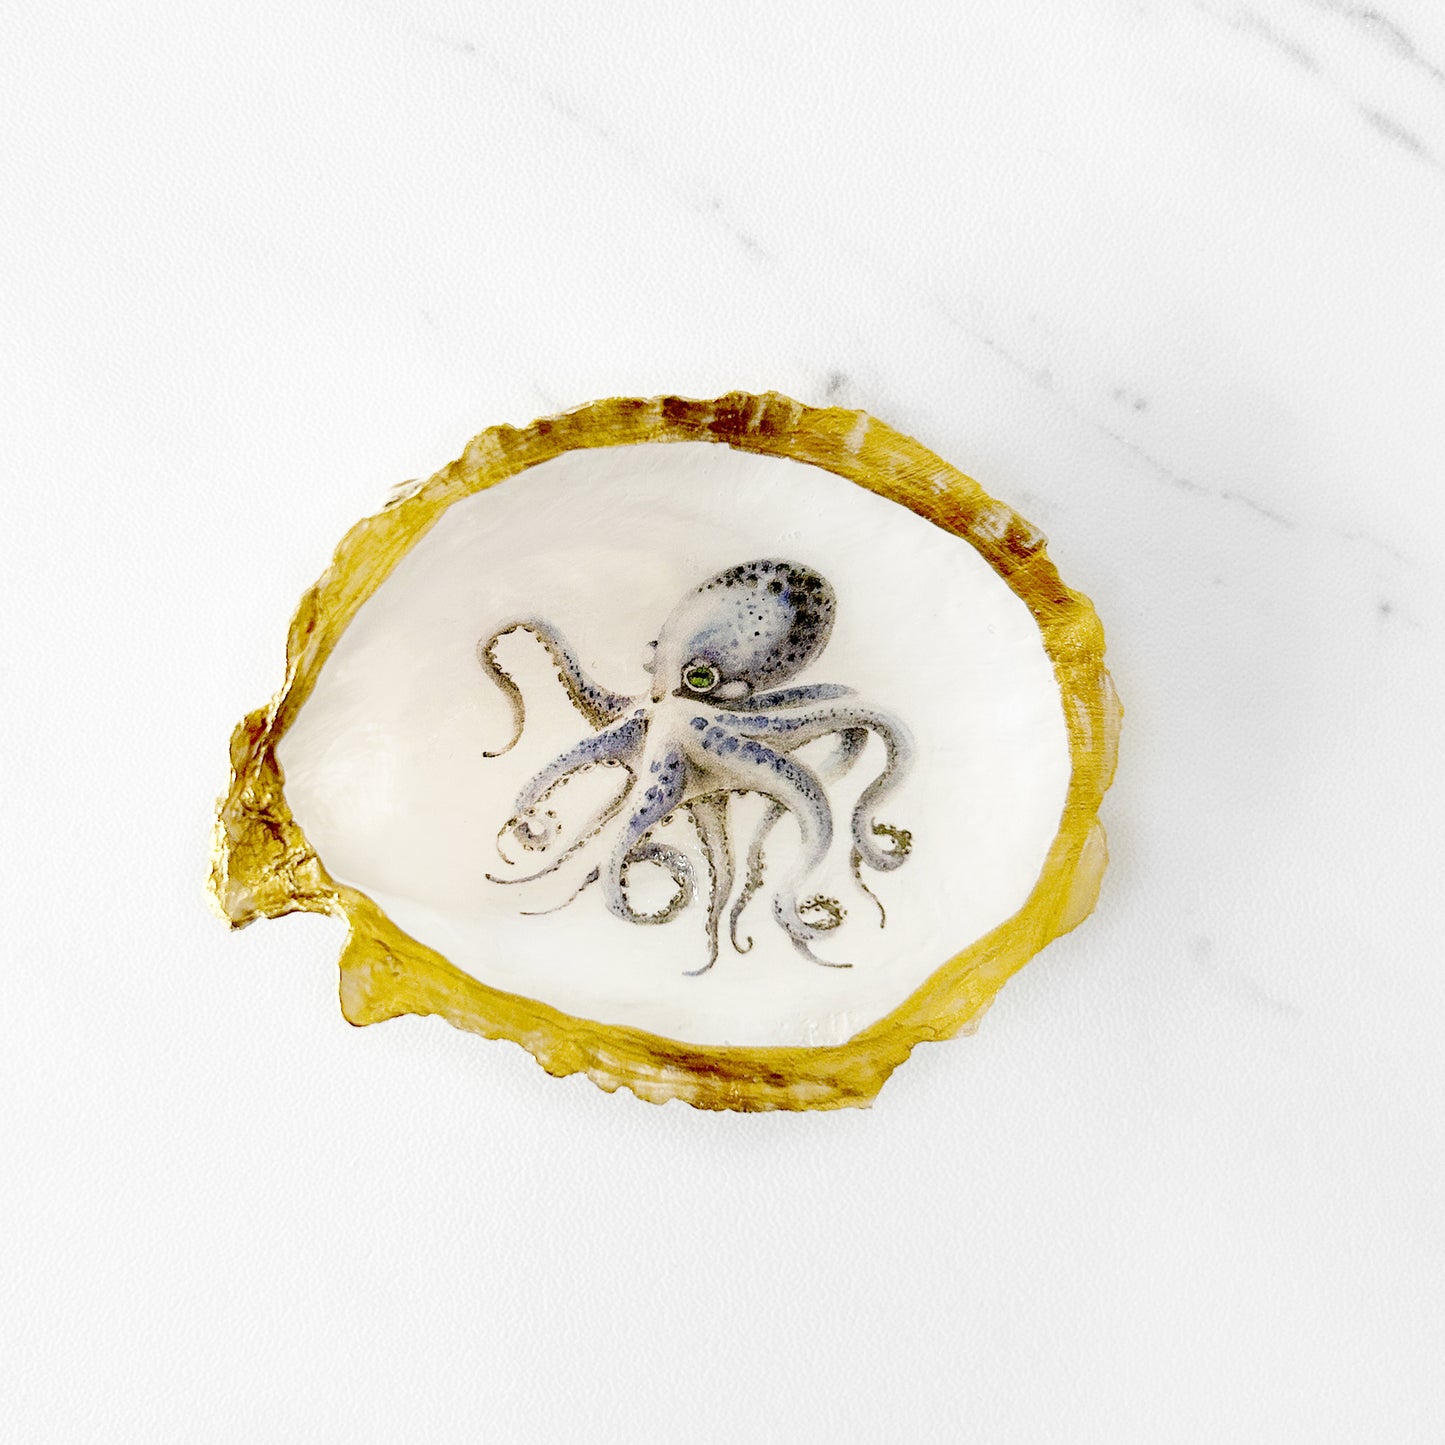 Sea Life Crab, Lobster, Octopus, Fish Decoupage Oyster Shell Trinket